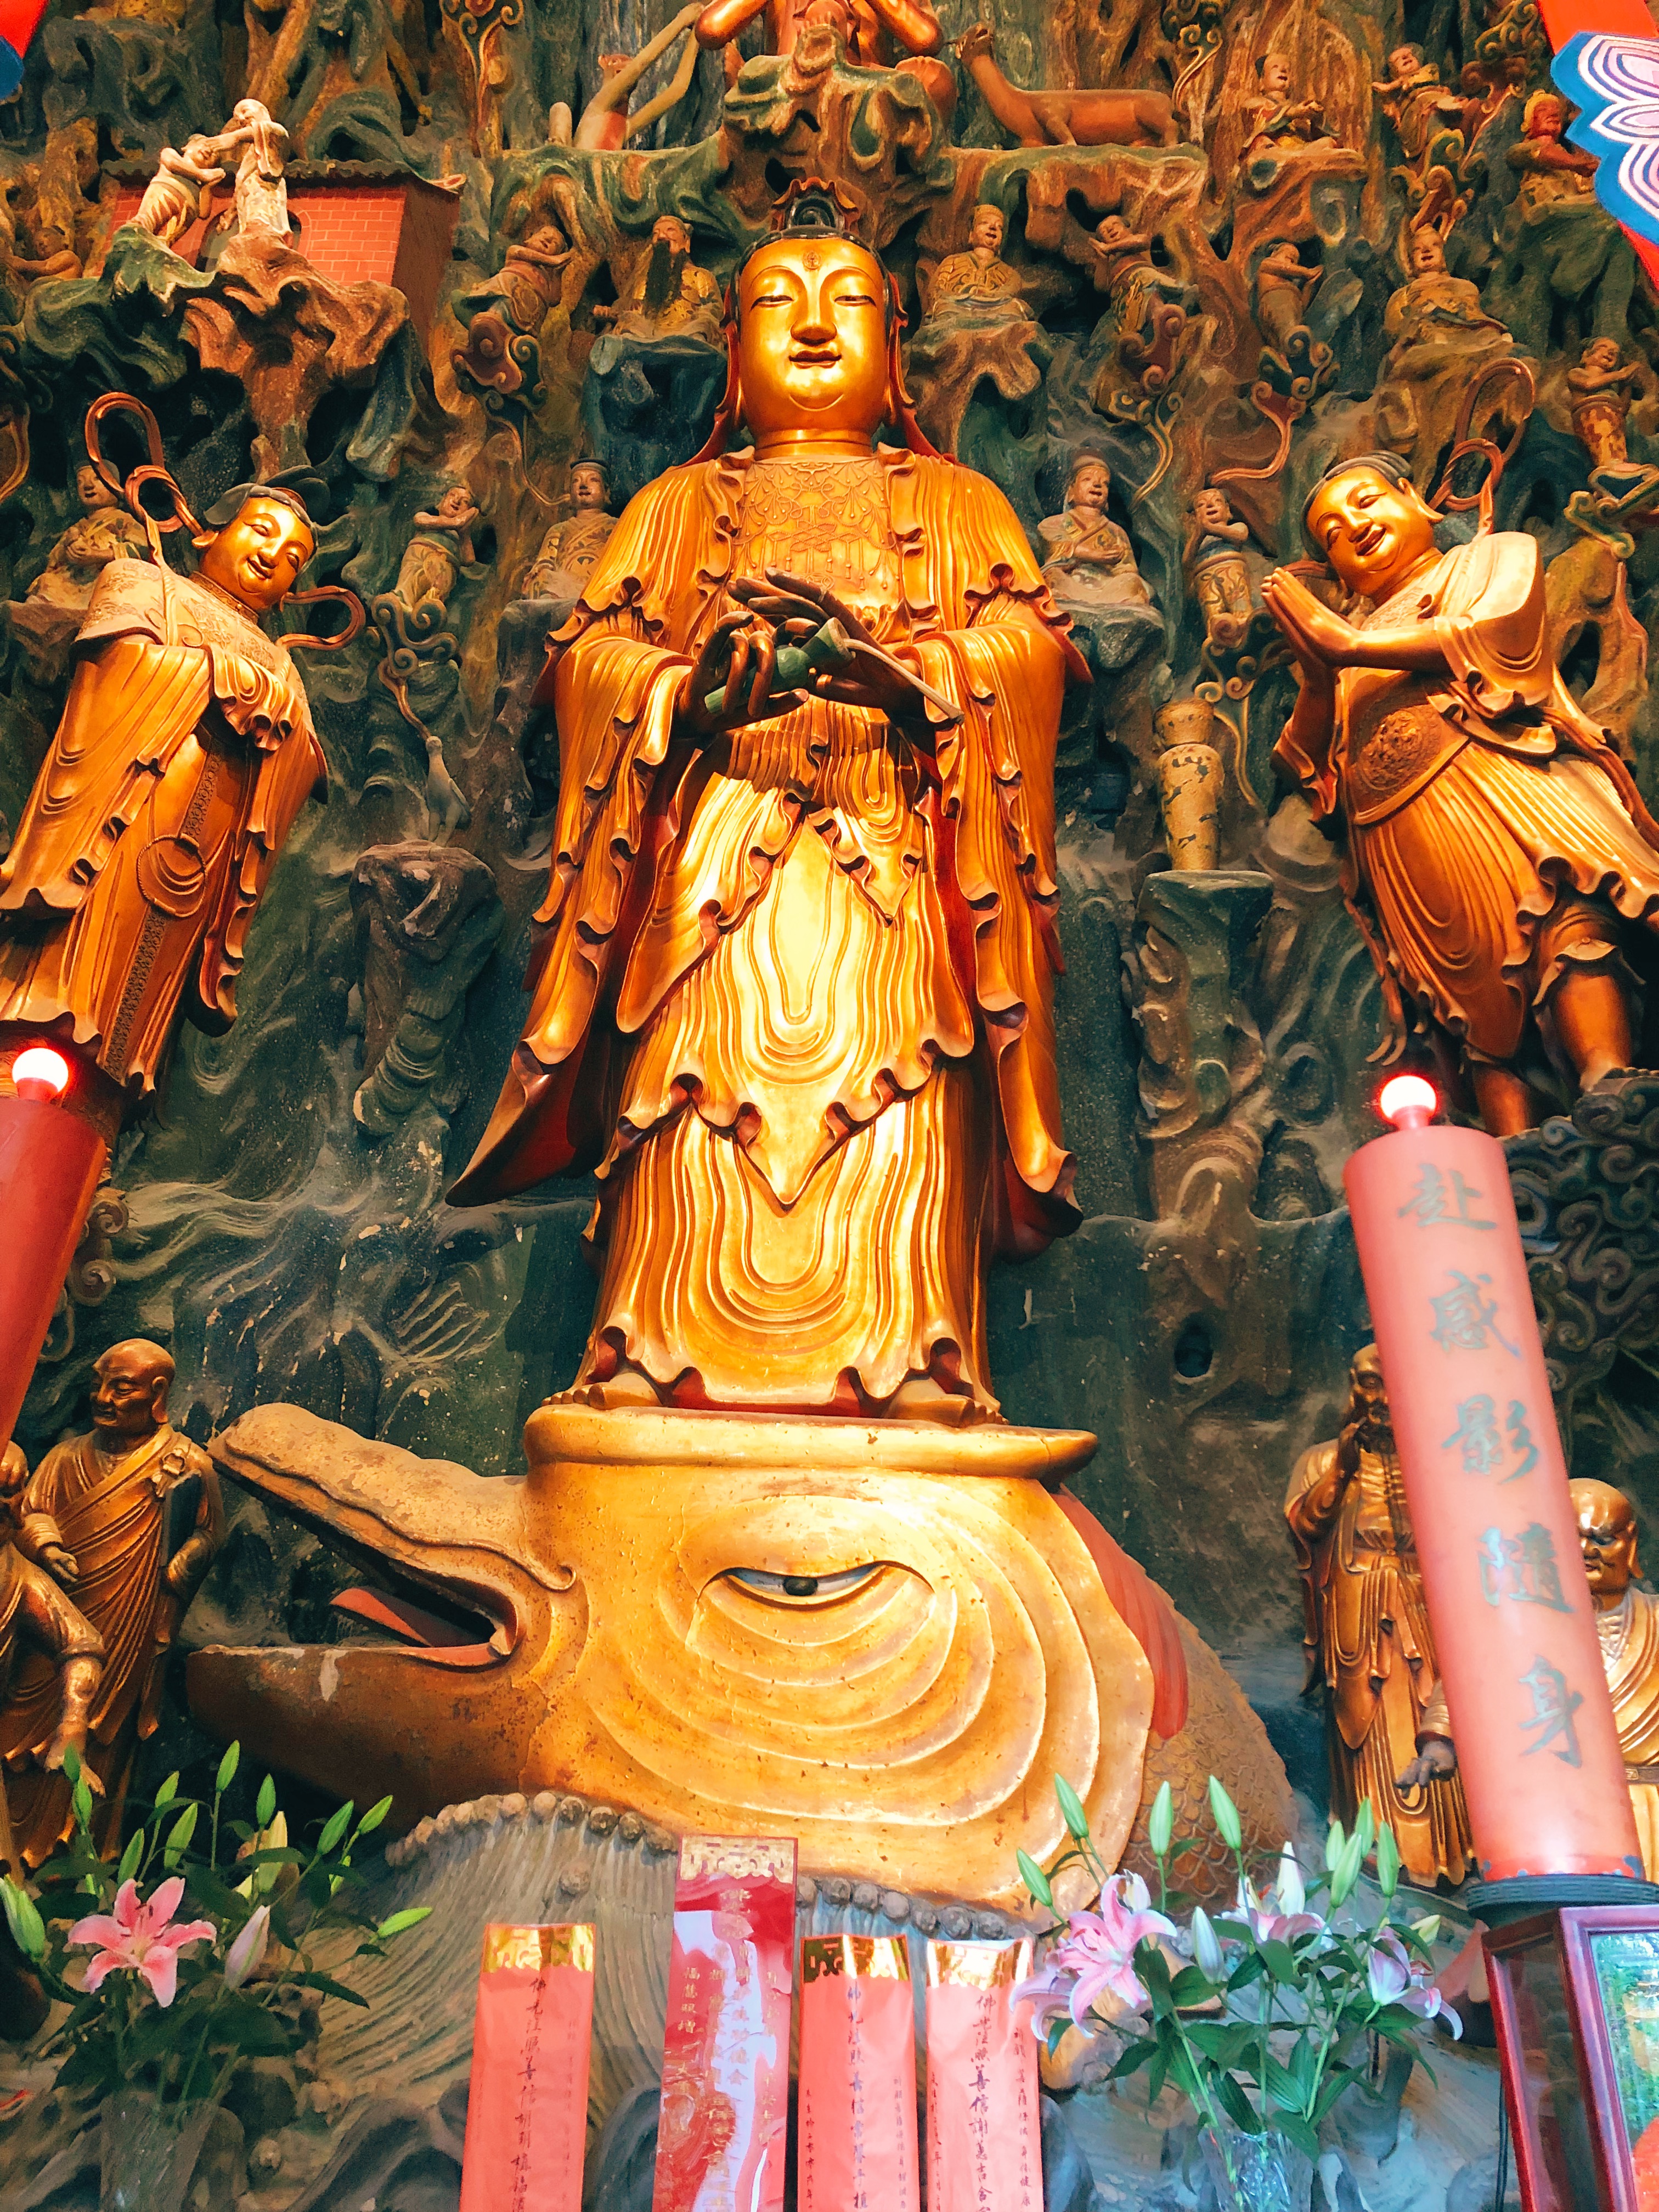 The past, present, and future Buddhas